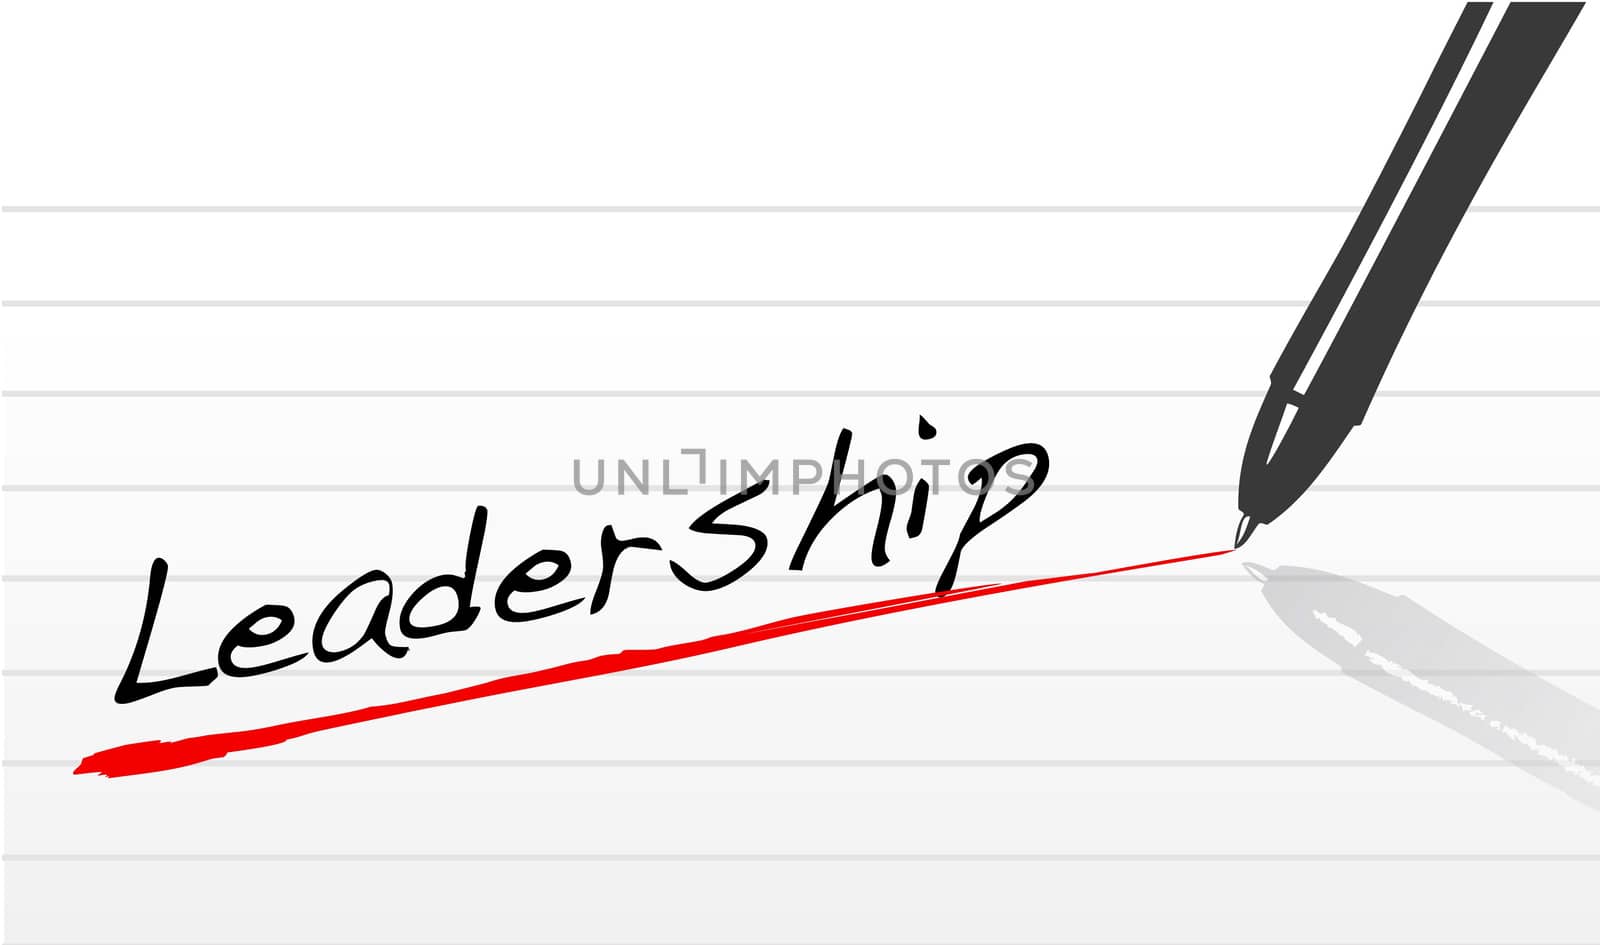 Leadership underlined in pen on a white background by alexmillos